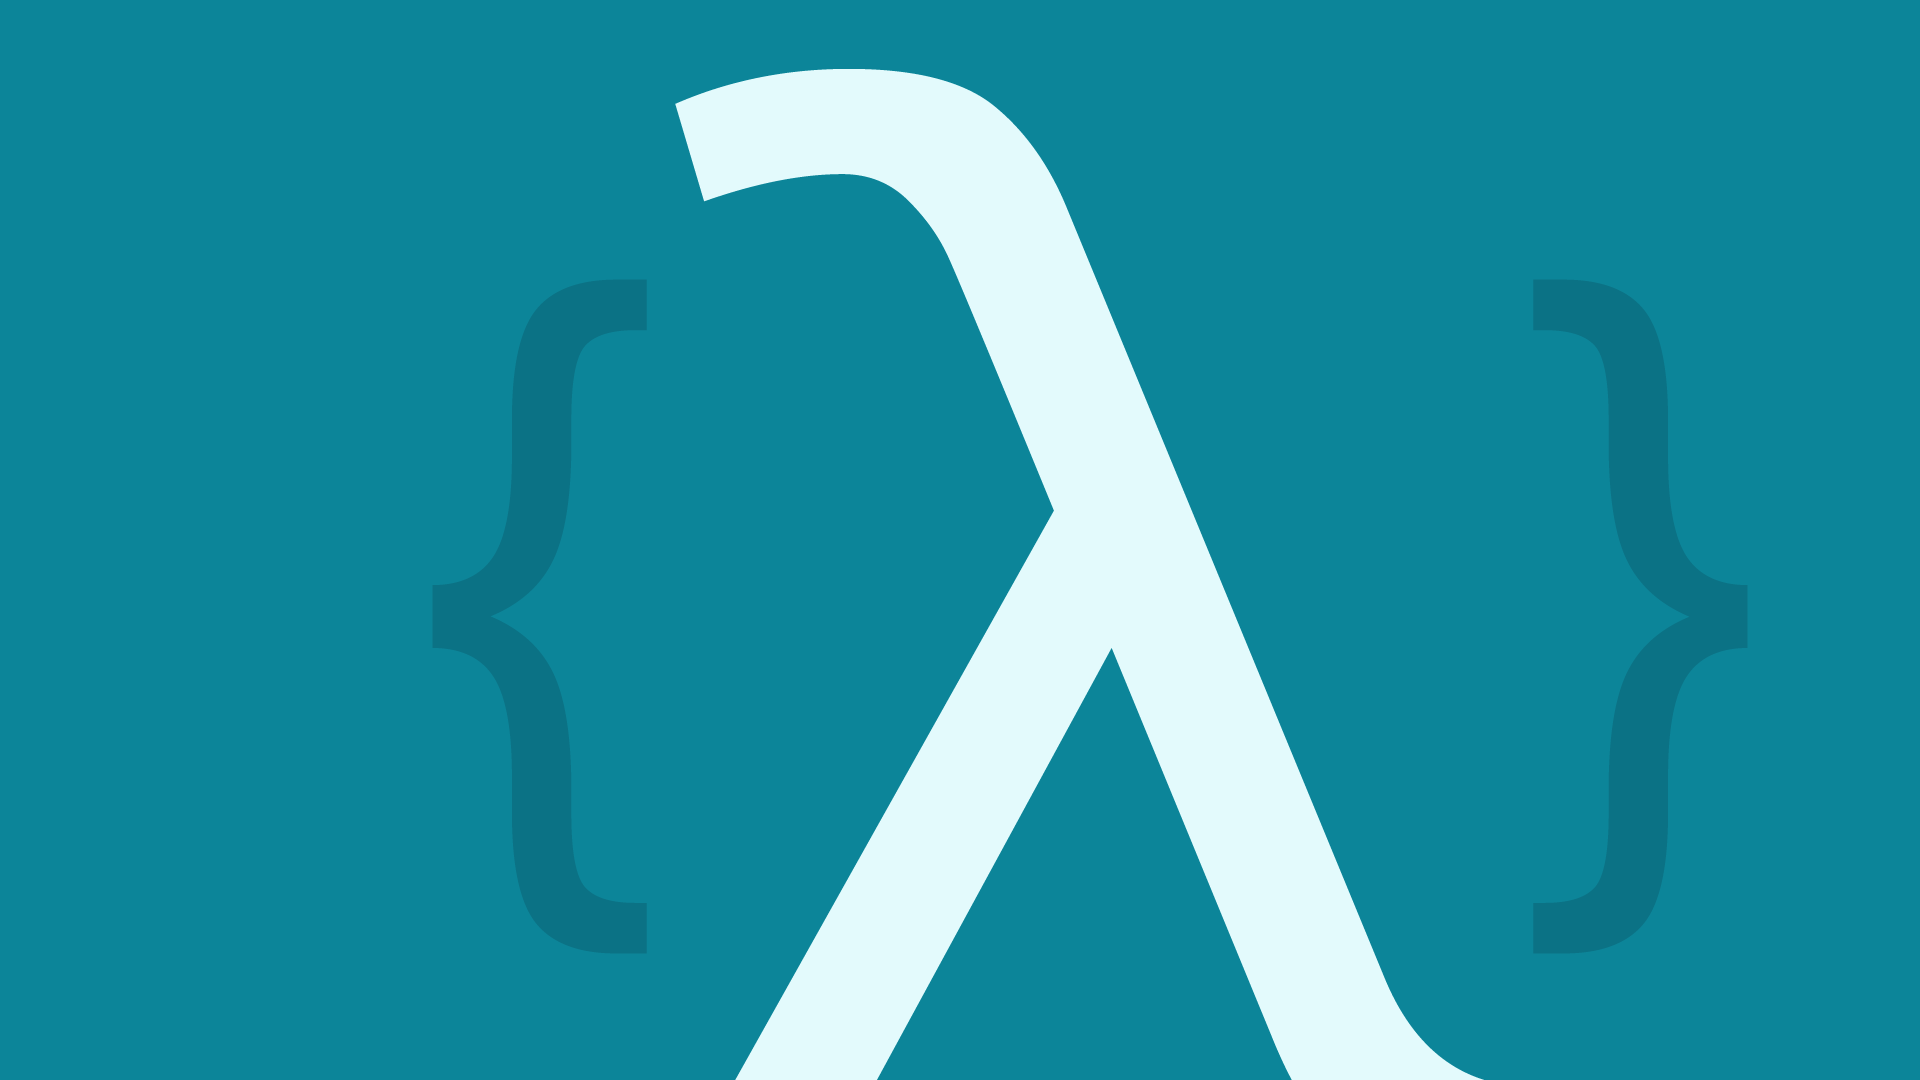 An illustration with a lambda symbol between curly brackets